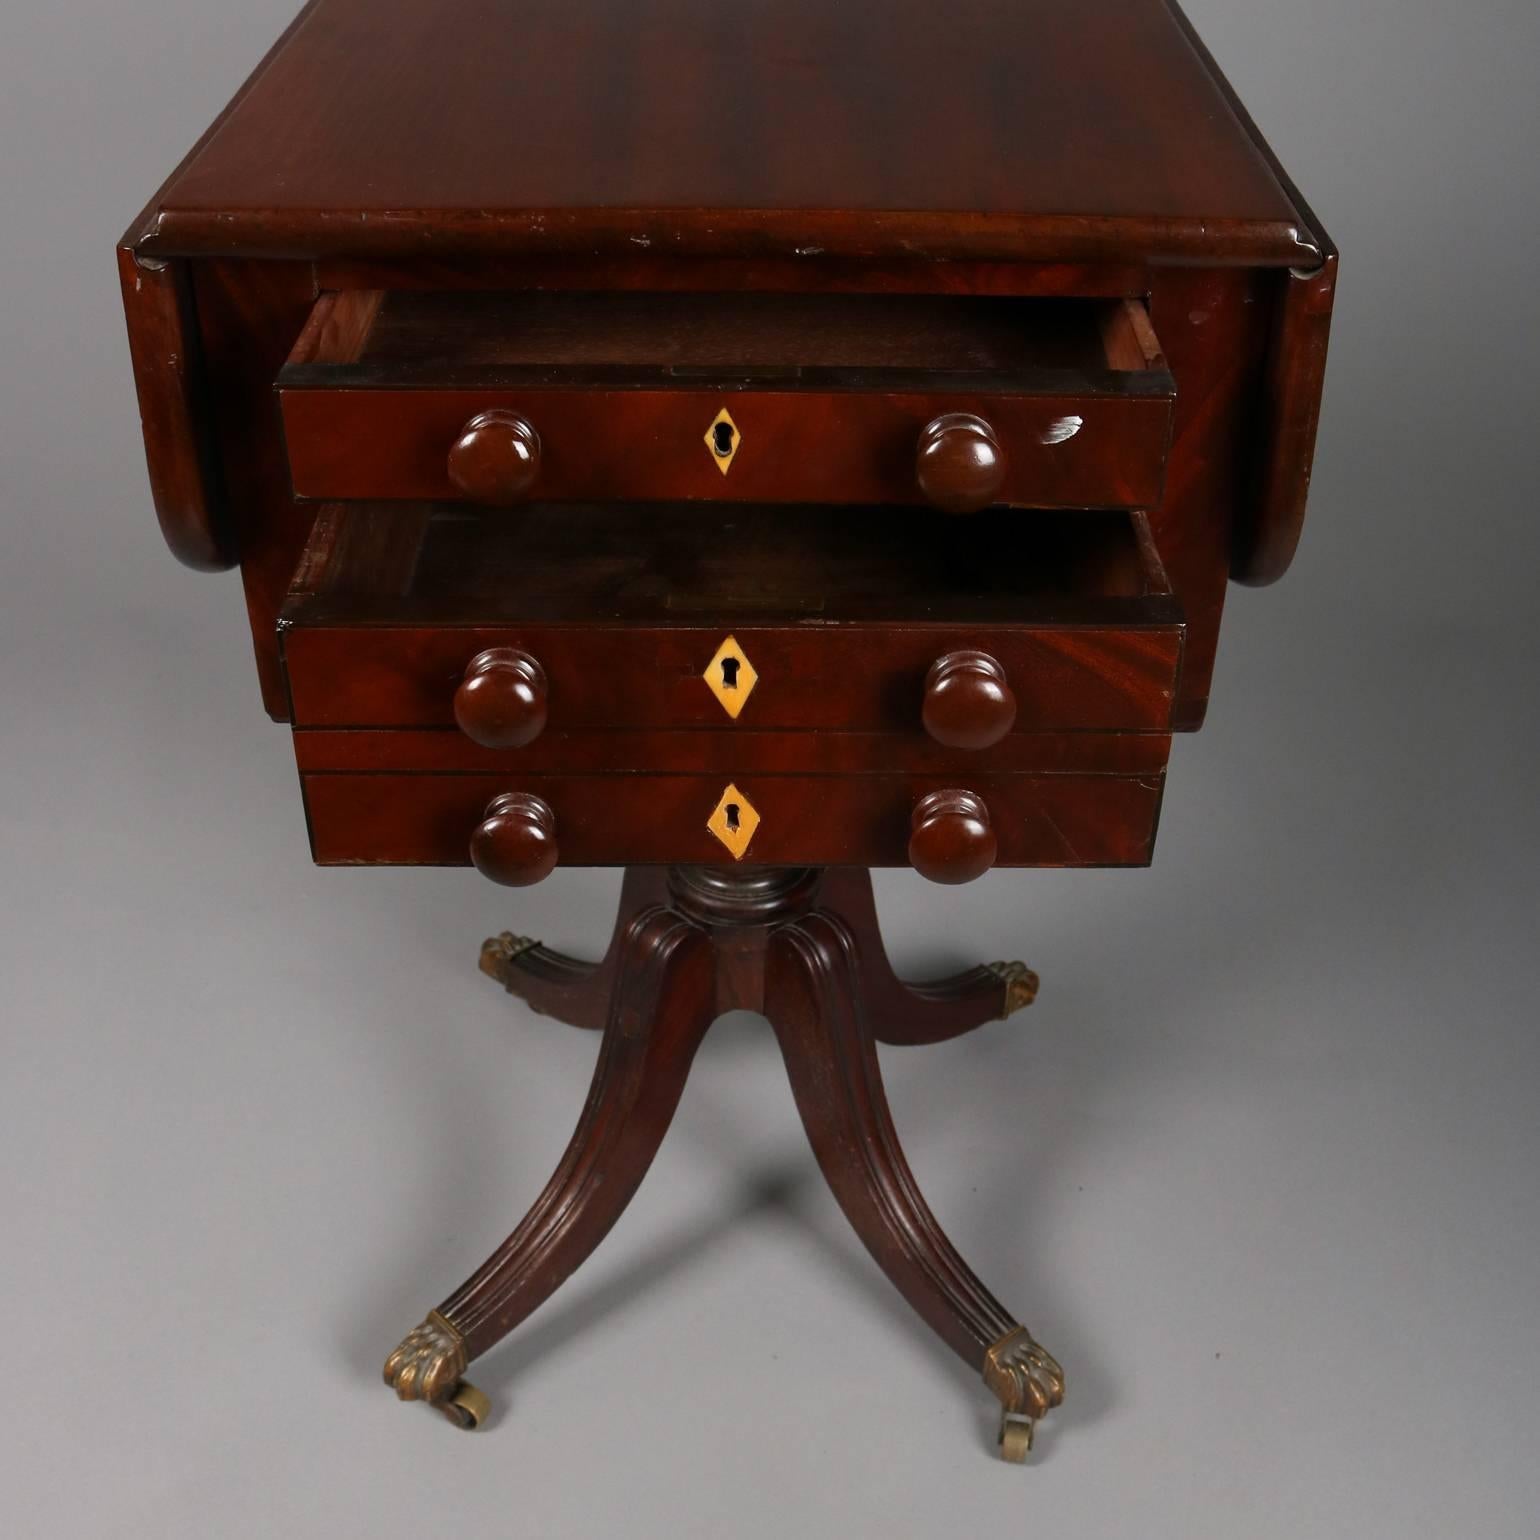 Sheraton Antique Inlaid Flame Mahogany with Bone Duncan Phyfe School Sewing Stand